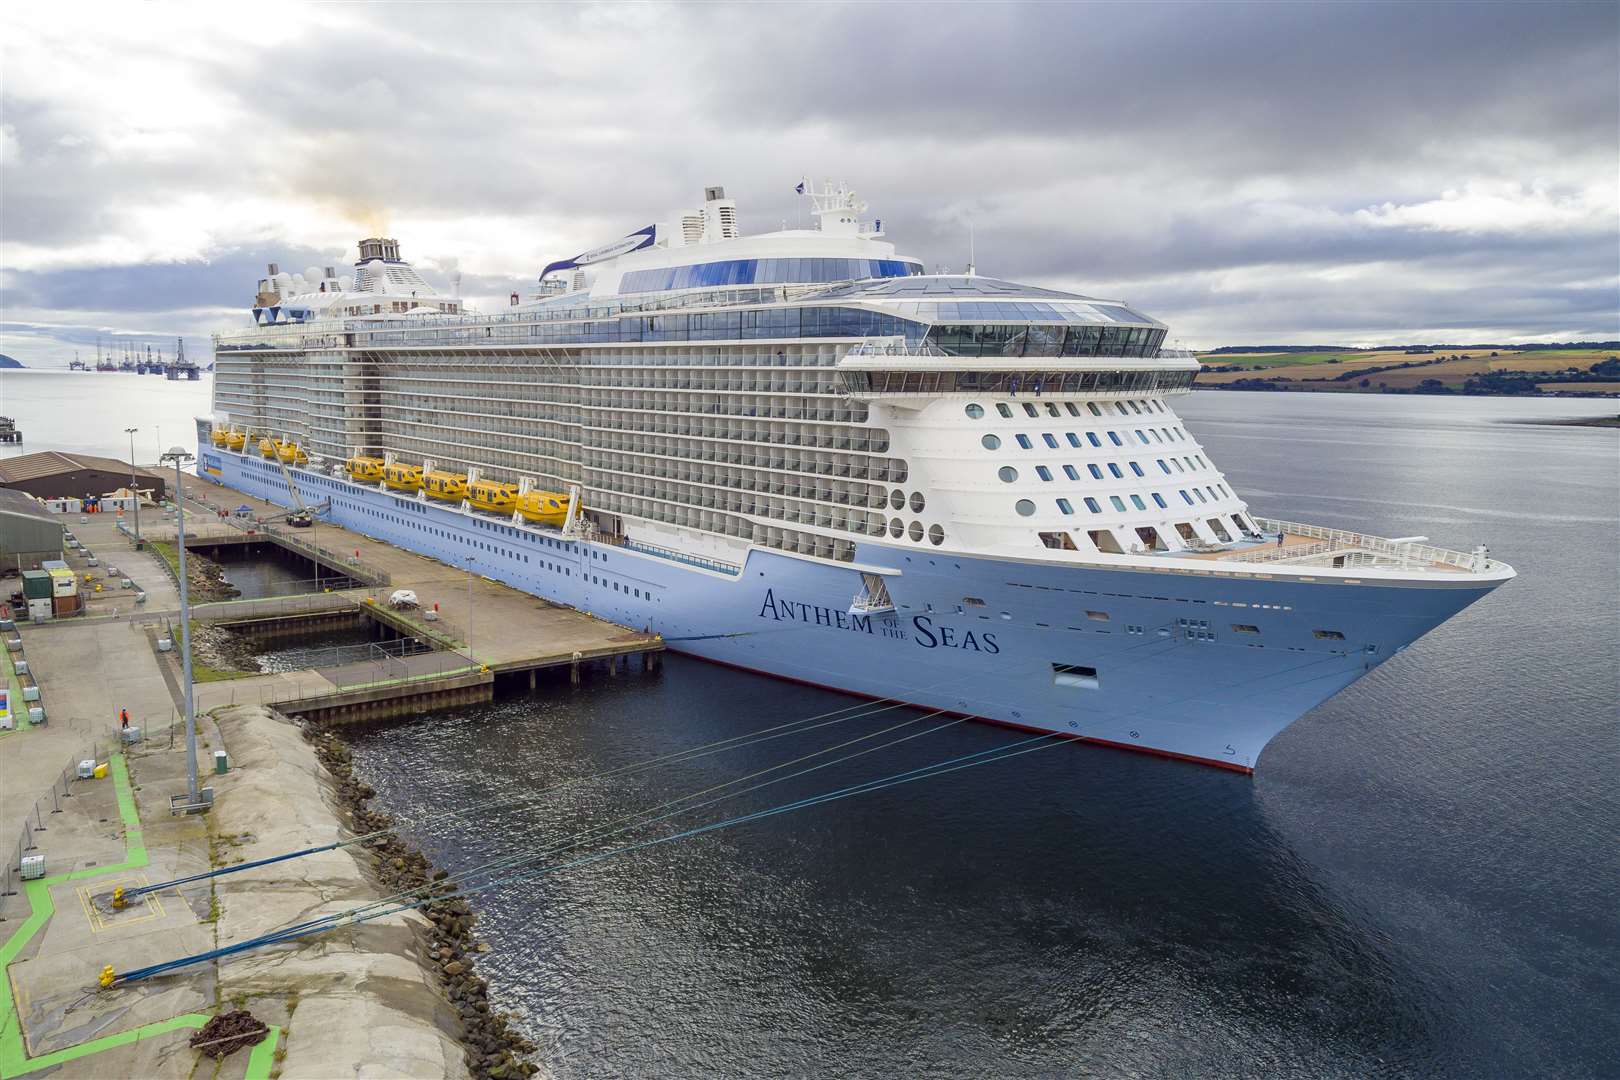 The Anthem of the Seas was among the vessels which brought cruise ship passengers back to the Highlands after last year's enforced break.